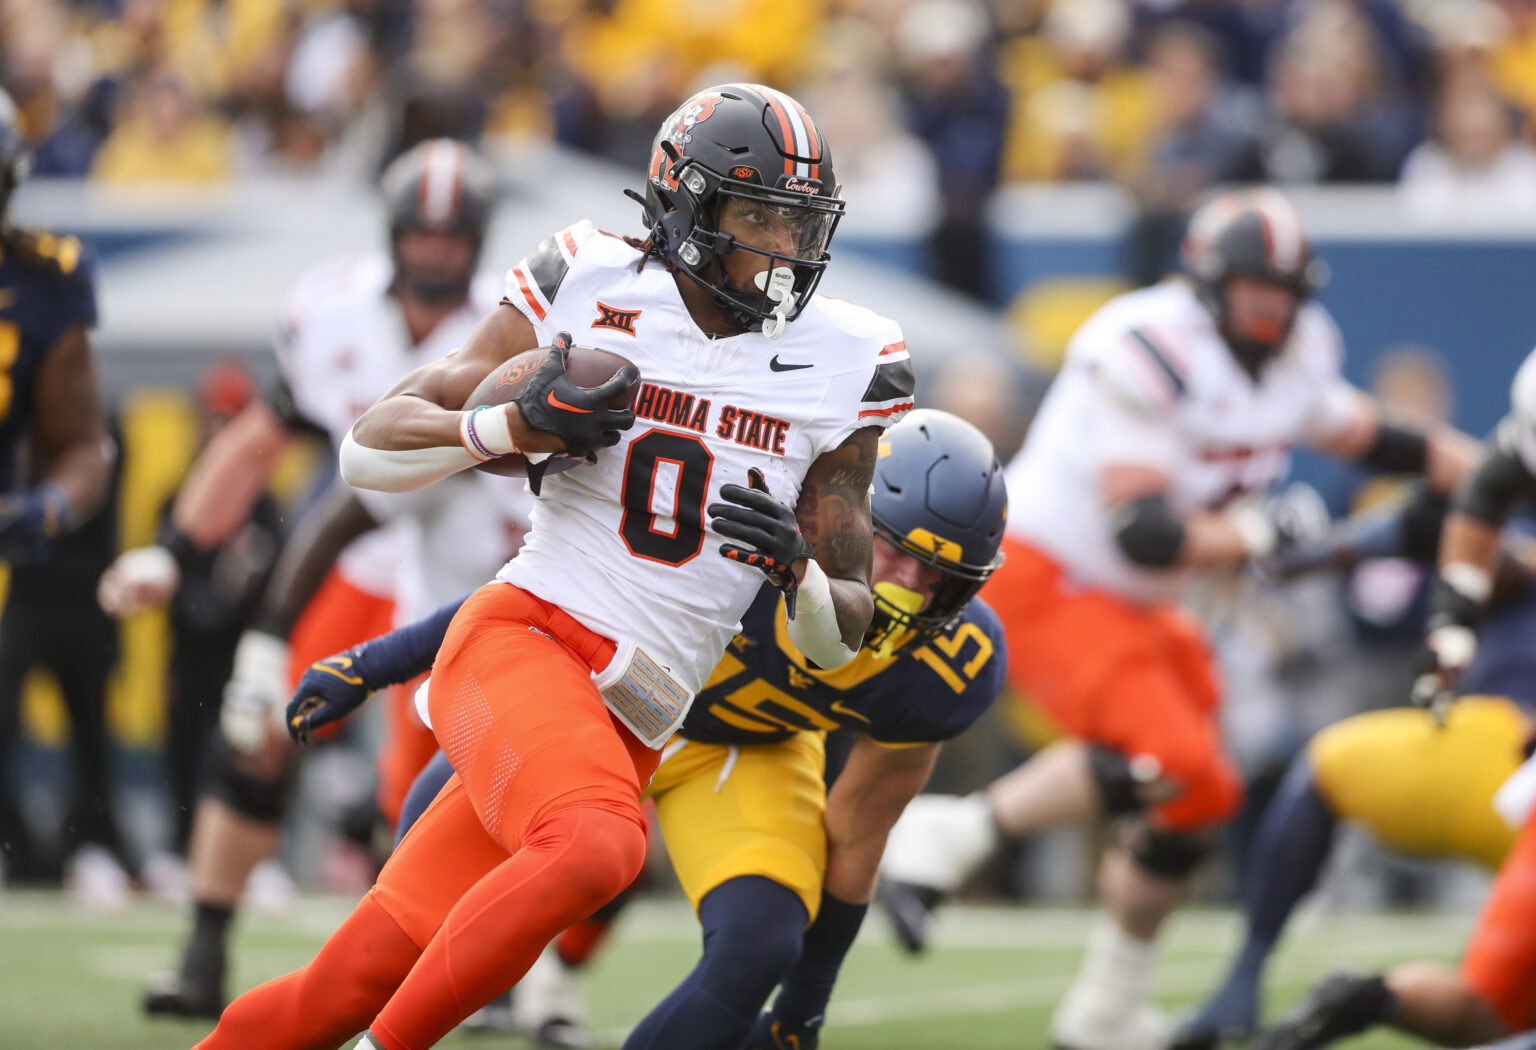 Gordon guides Oklahoma State to fifth straight win in Morgantown